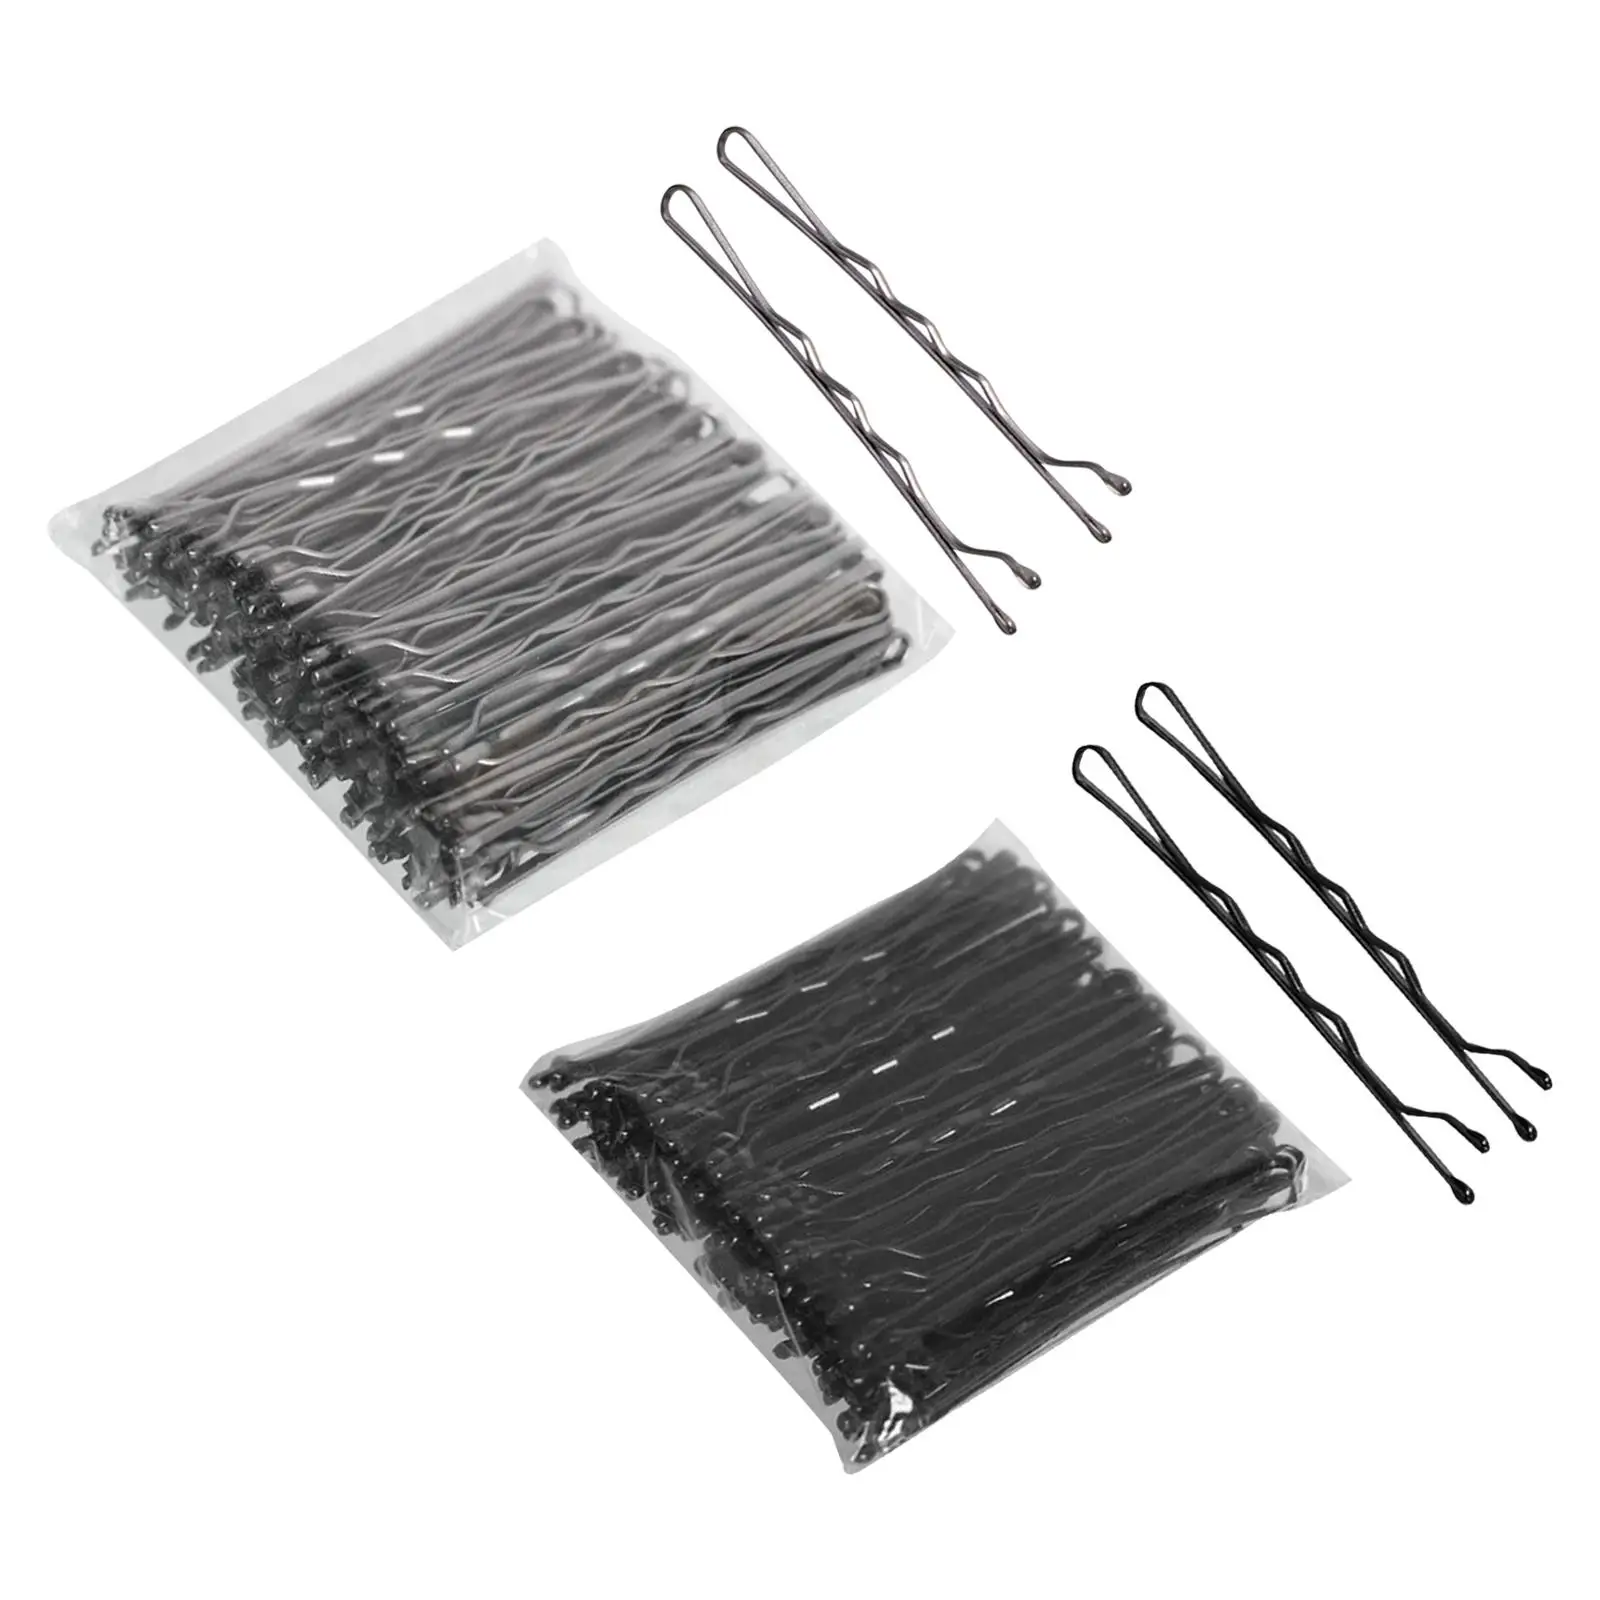 100x Hair Pin Keep Hairs in Place Fit All Hair Types Crimpled Slideproof Hair Accessories for Hairdressing Salon Girls Lady